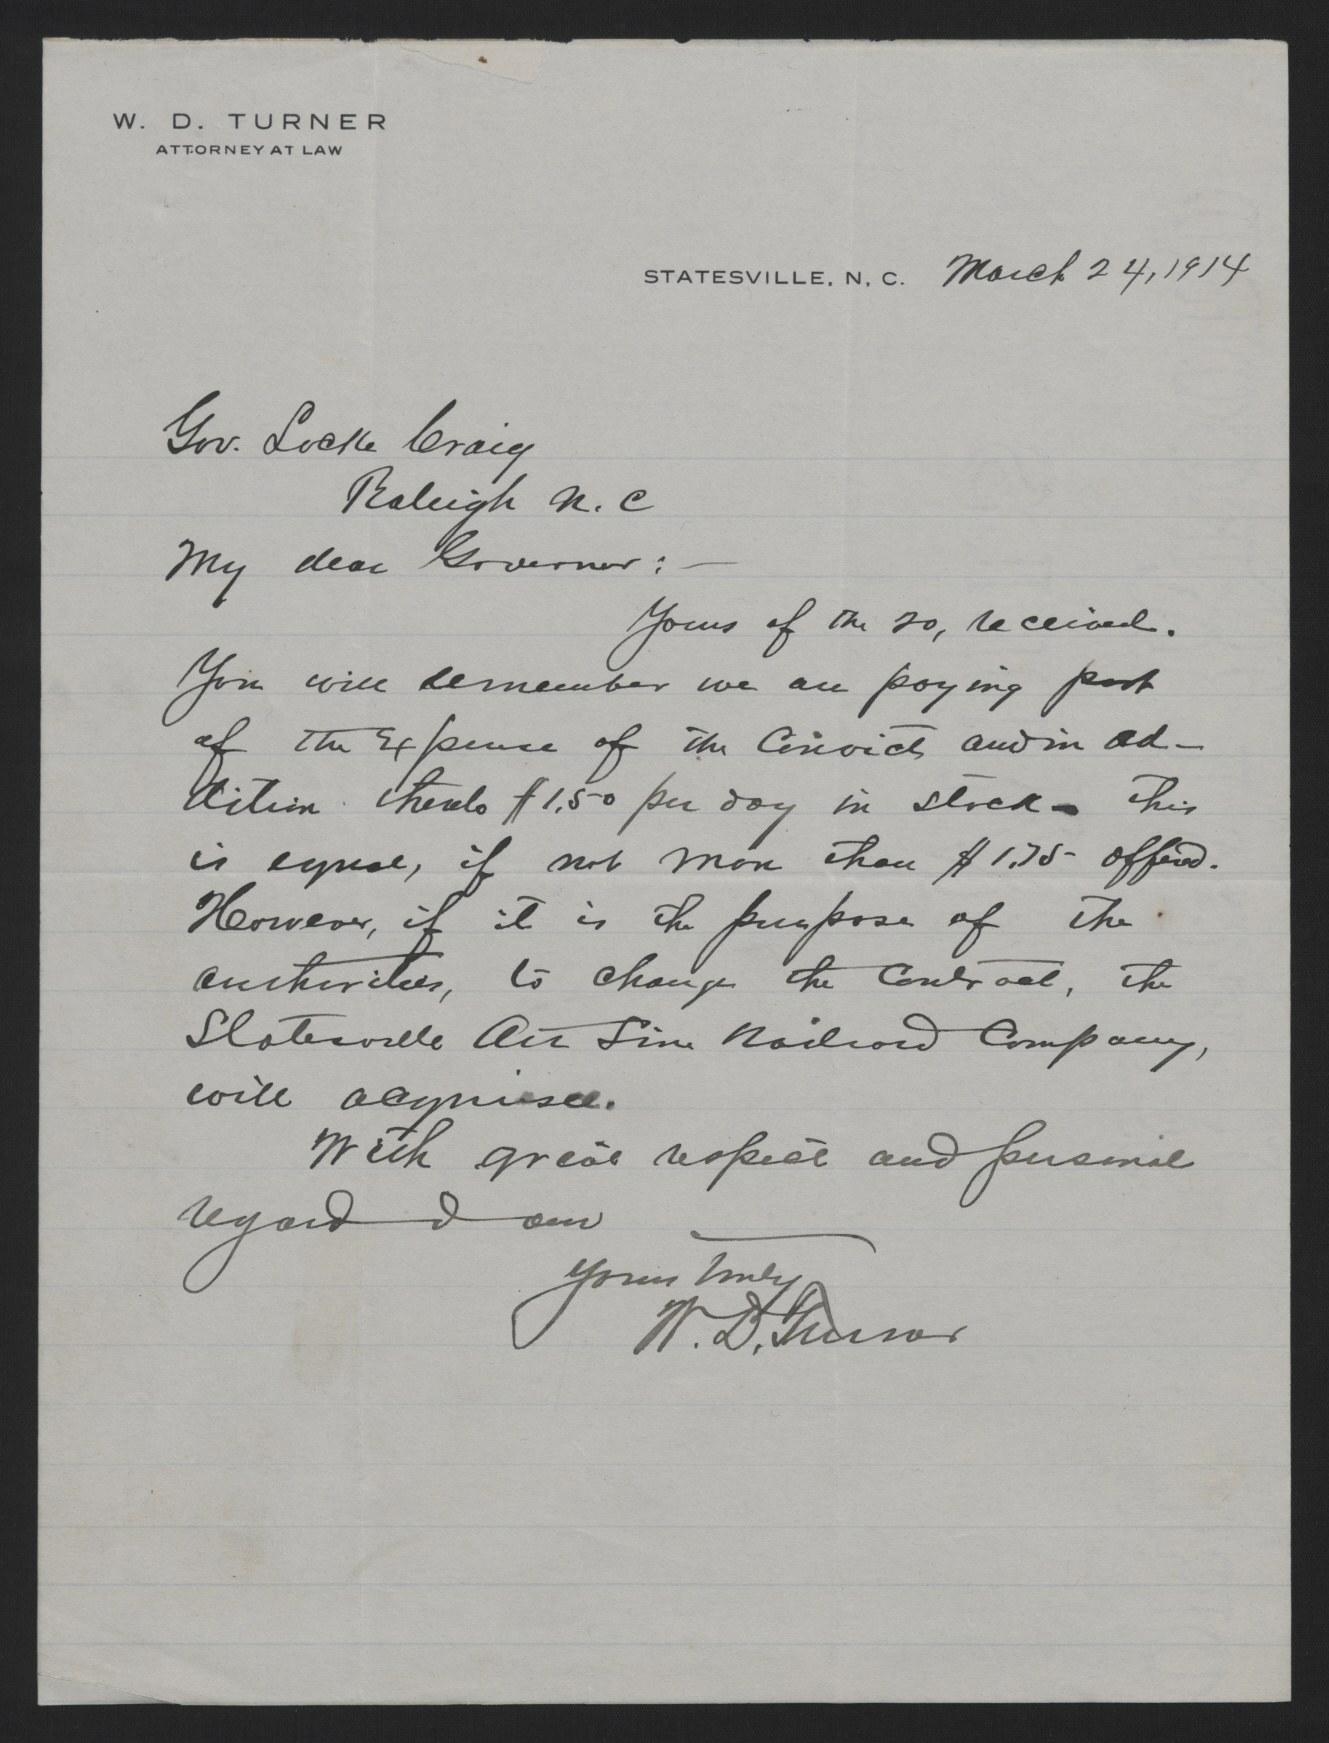 Letter from Turner to Craig, March 24, 1914